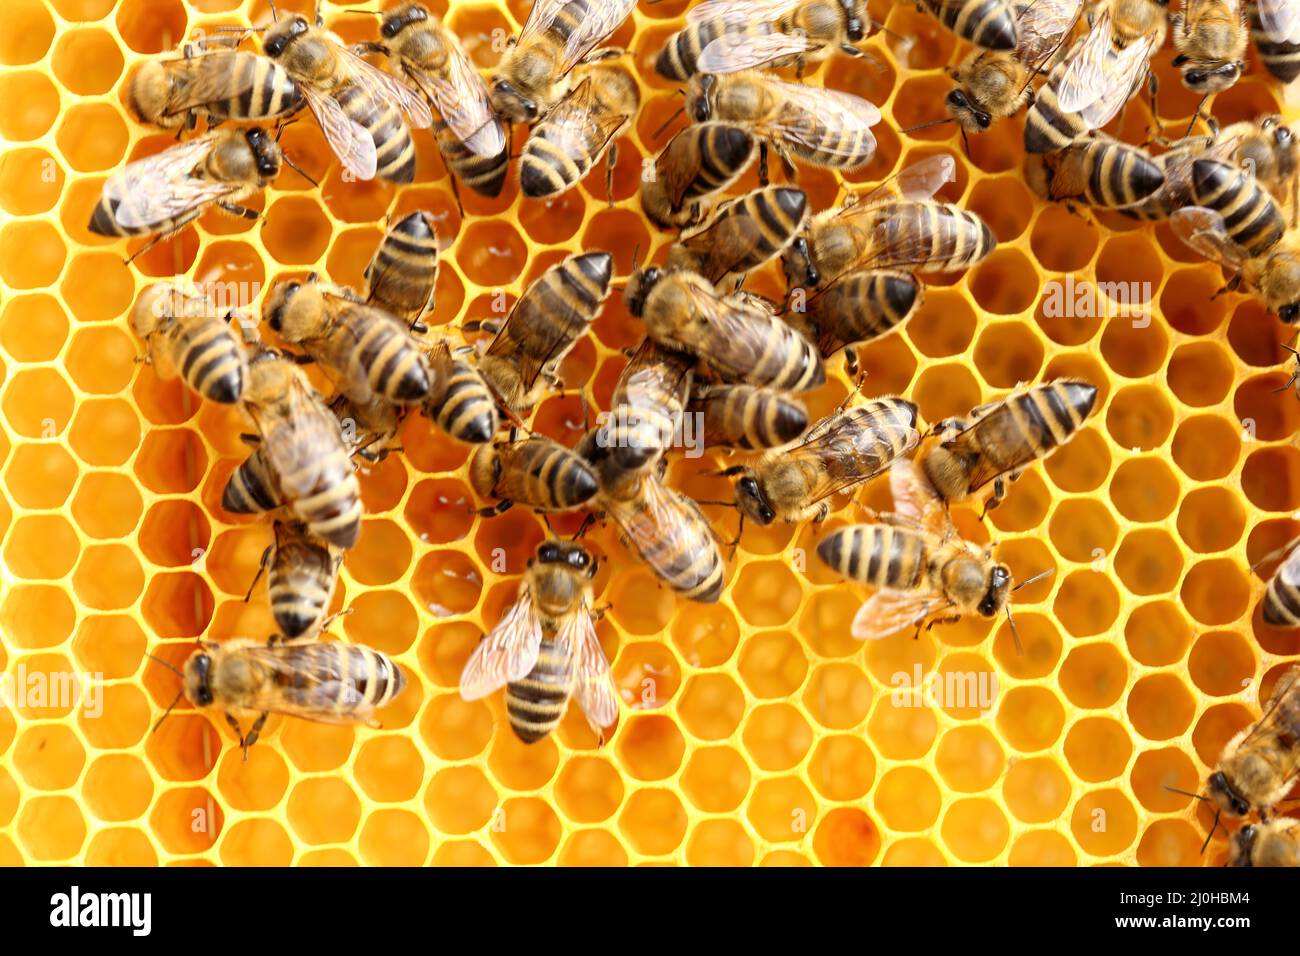 Some honey bees on a beeswax Stock Photo